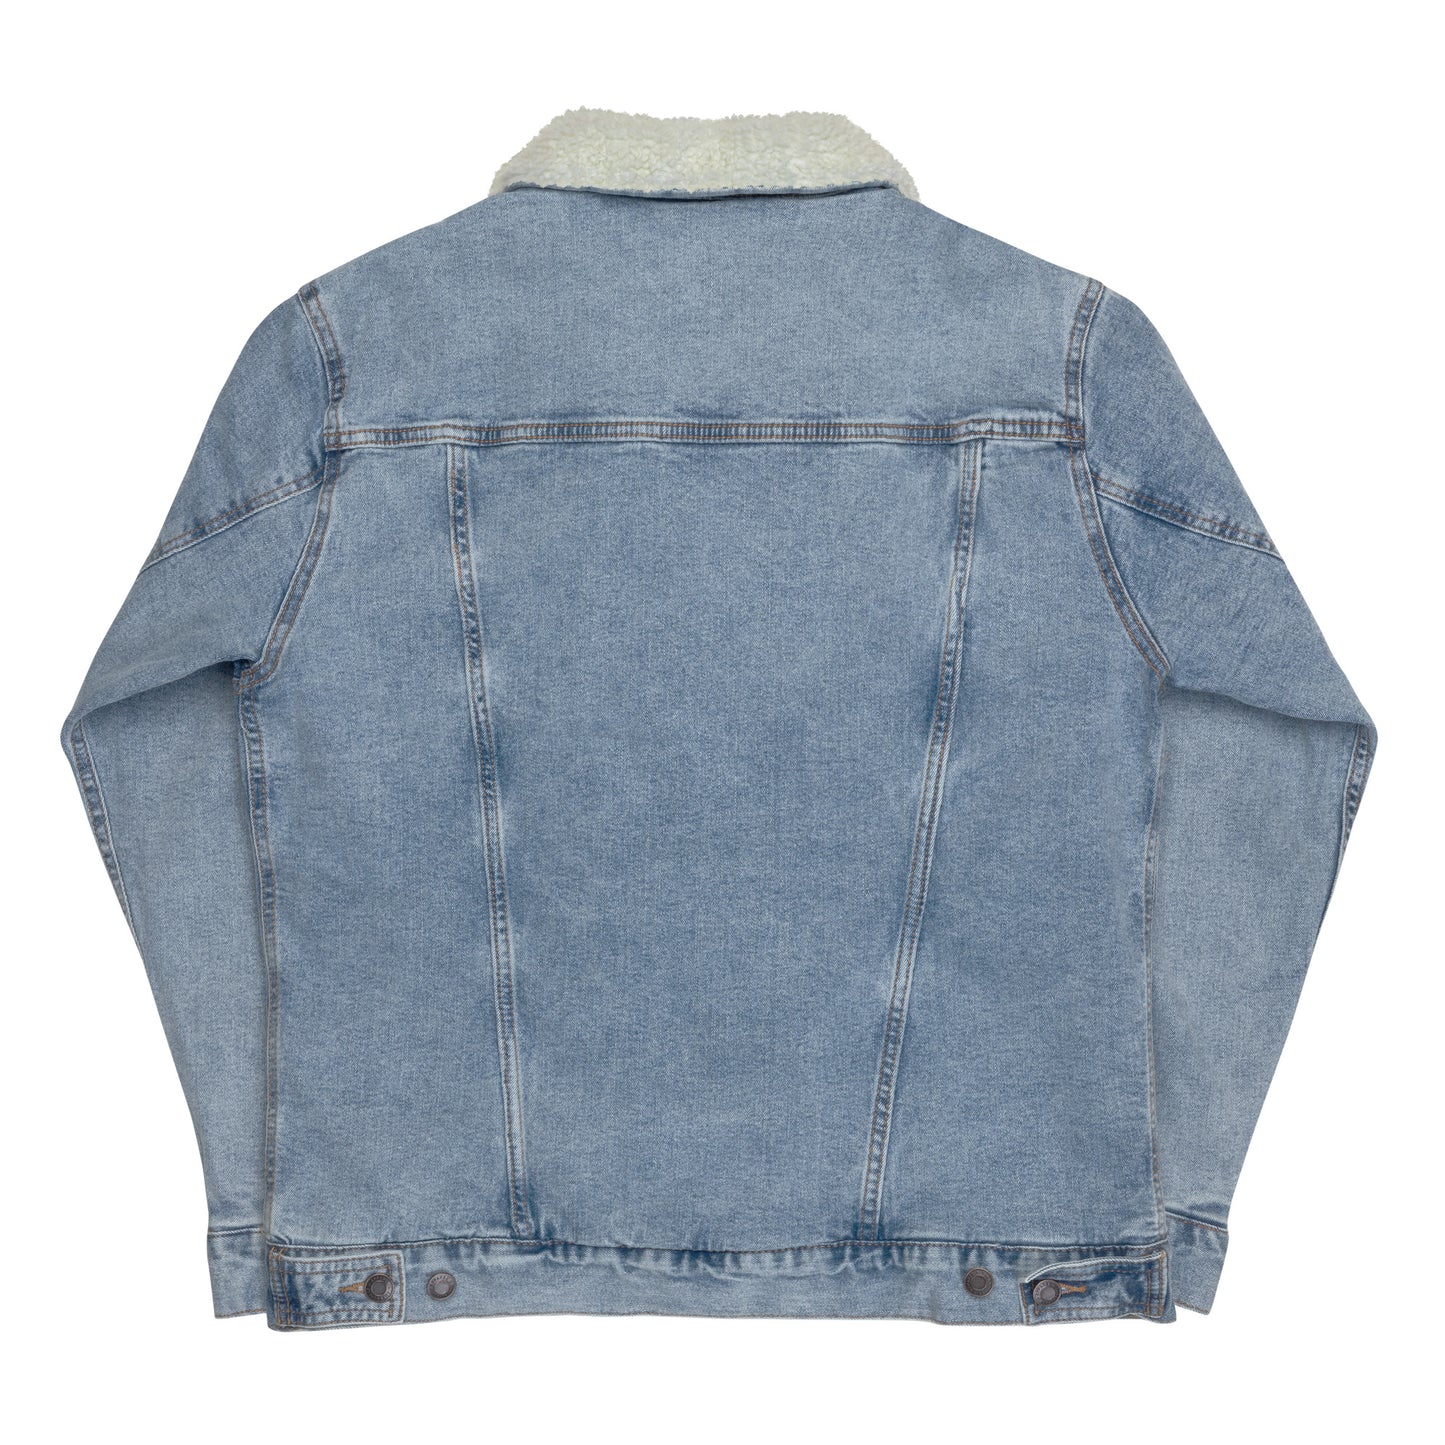 Agent of Chaos denim sherpa jacket